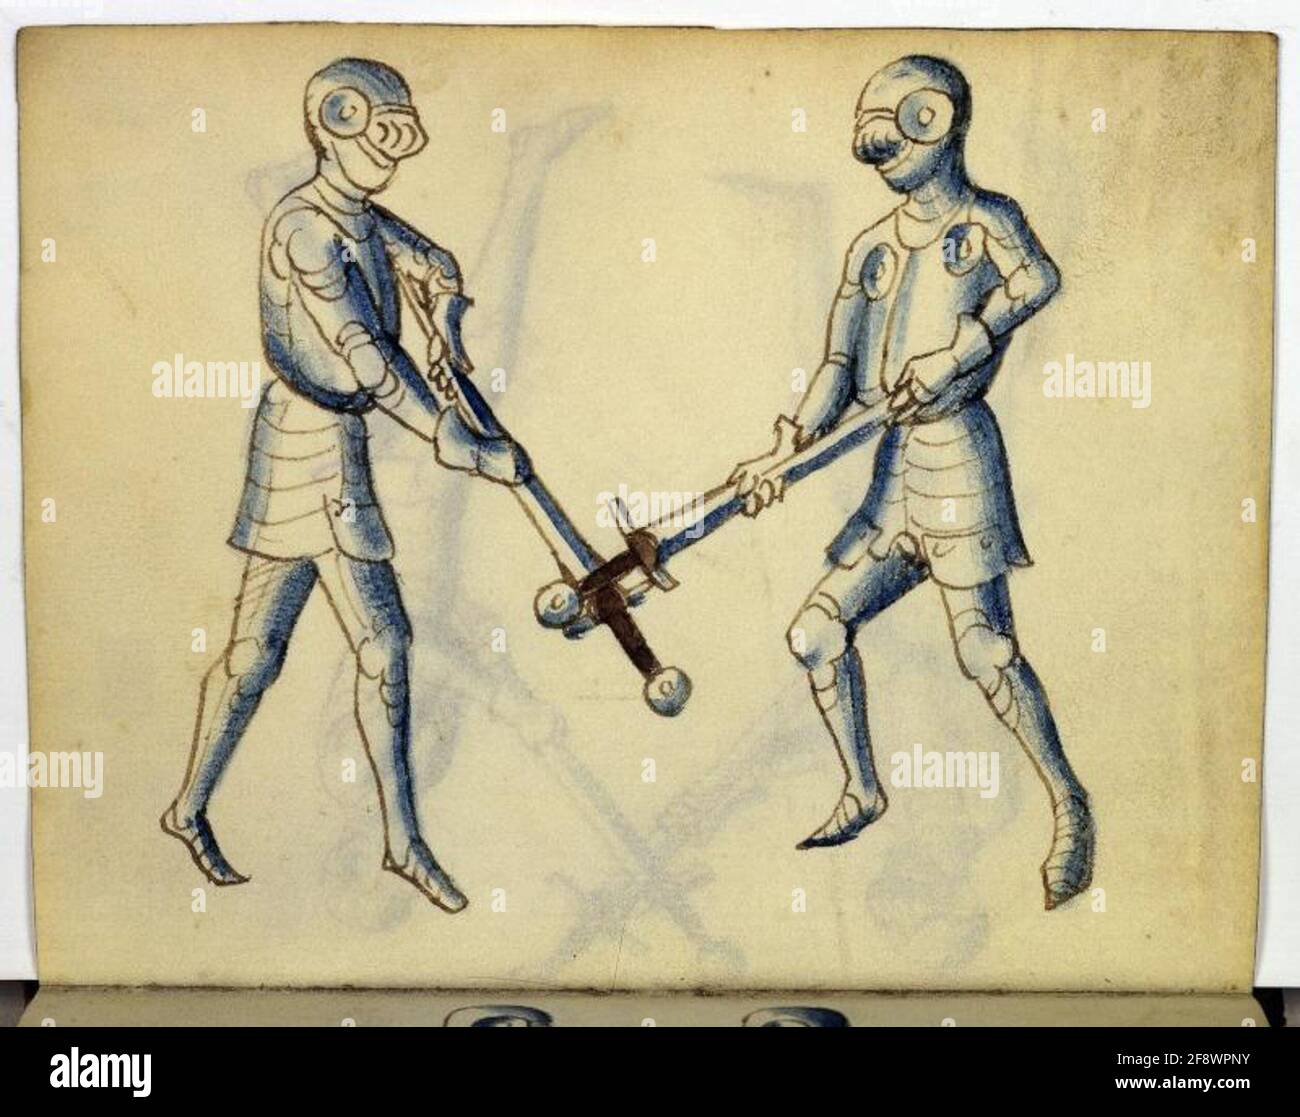 Cod. 11093, fol. 26v: Book on Swordsmanship and Wrestling Full page: fencing scene; pen and brush drawing, Southwestern Germany, mid-15th c. Stock Photo